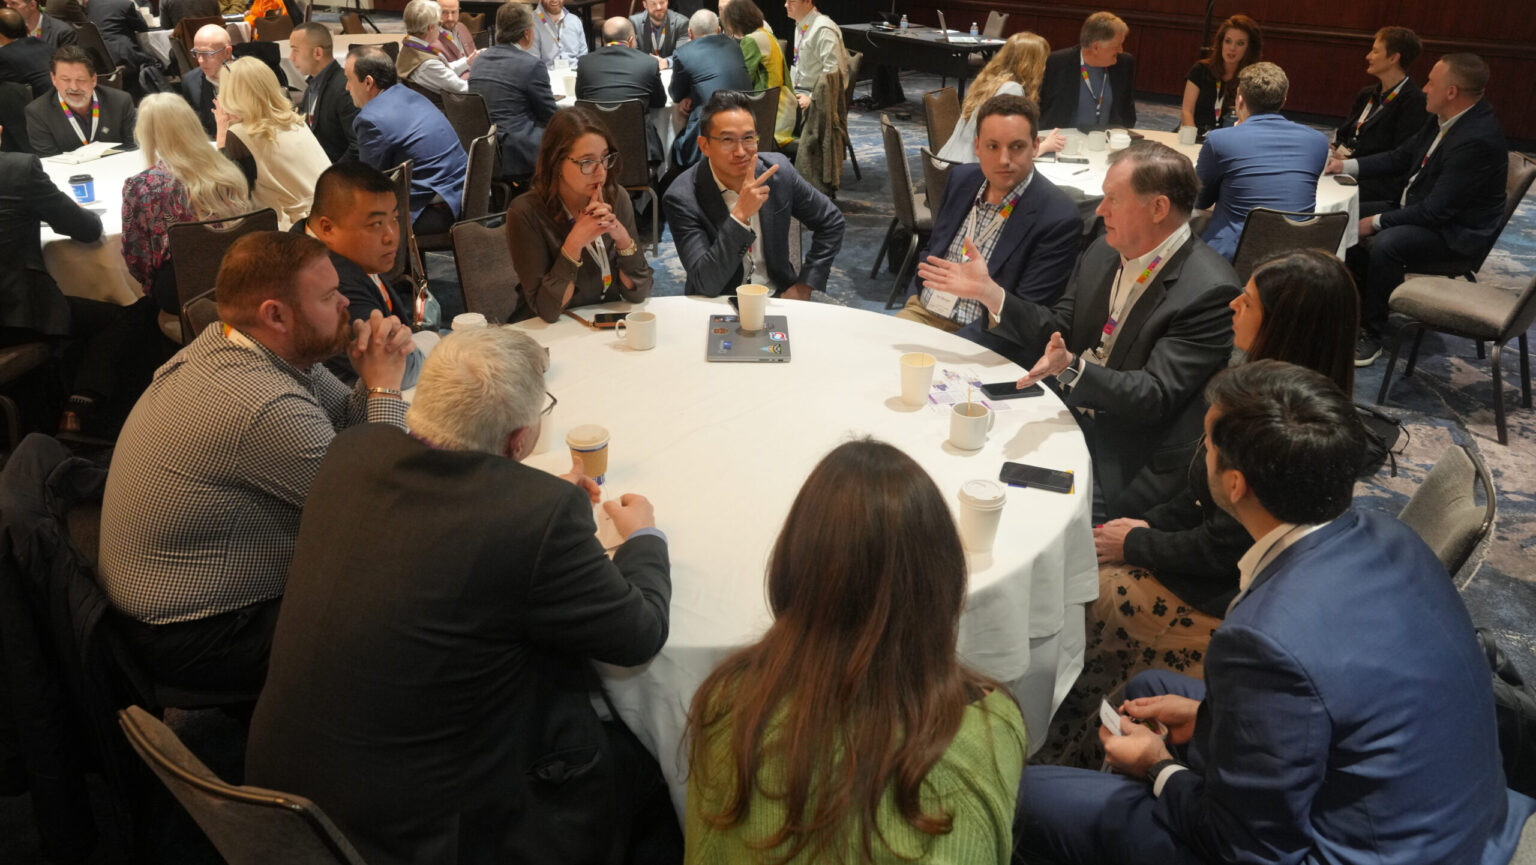 12 members of the industry sit and discuss around a round white table.